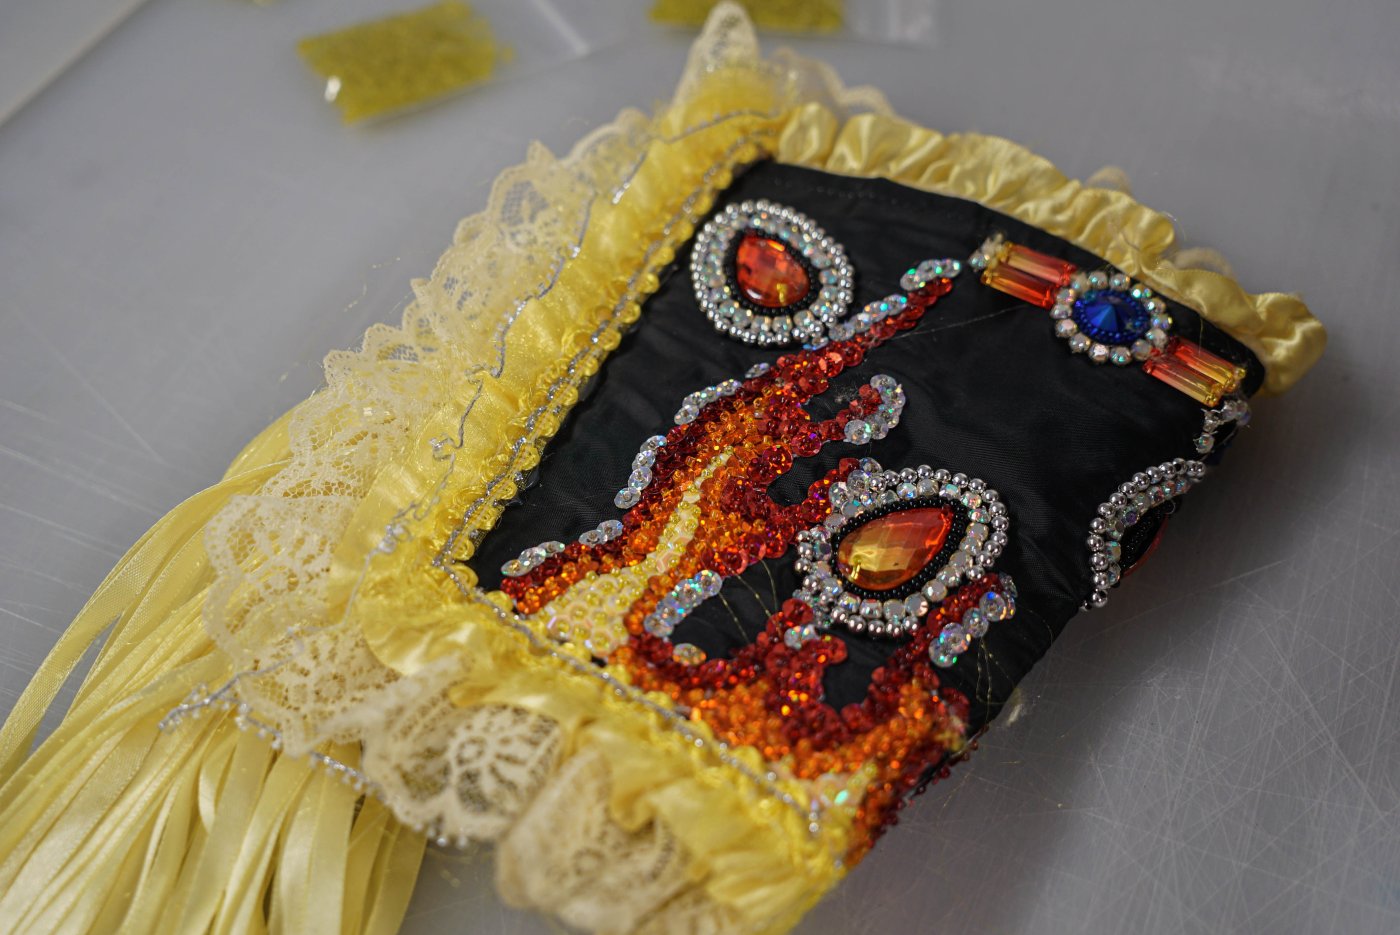 Close-up image of a beaded cuff with yellow fabric and orange, red, blue and blacks beads and stones.